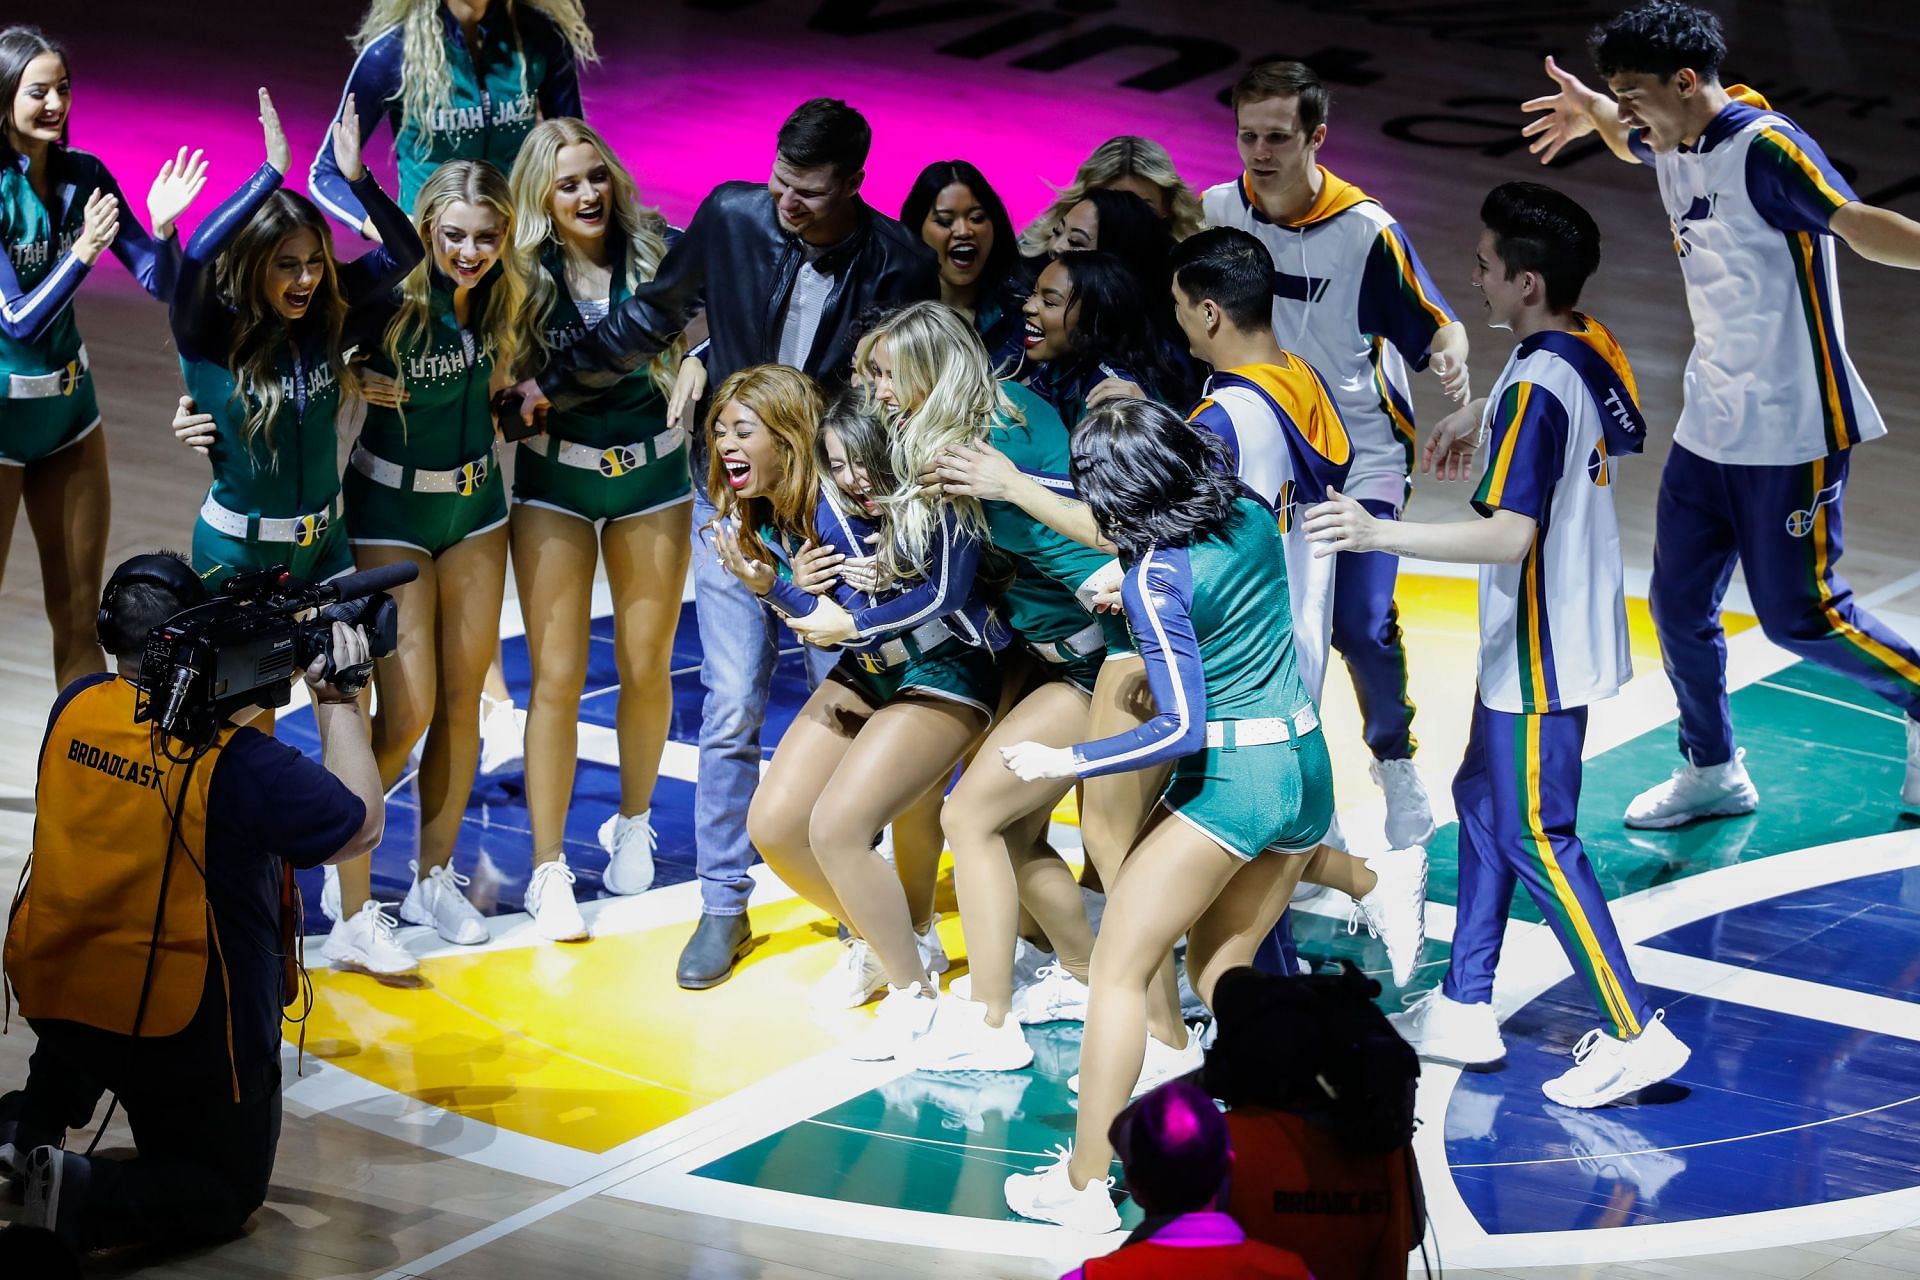 Utah Jazz dancer is proposed to in the middle of her routine. [Photo via Deseret News]